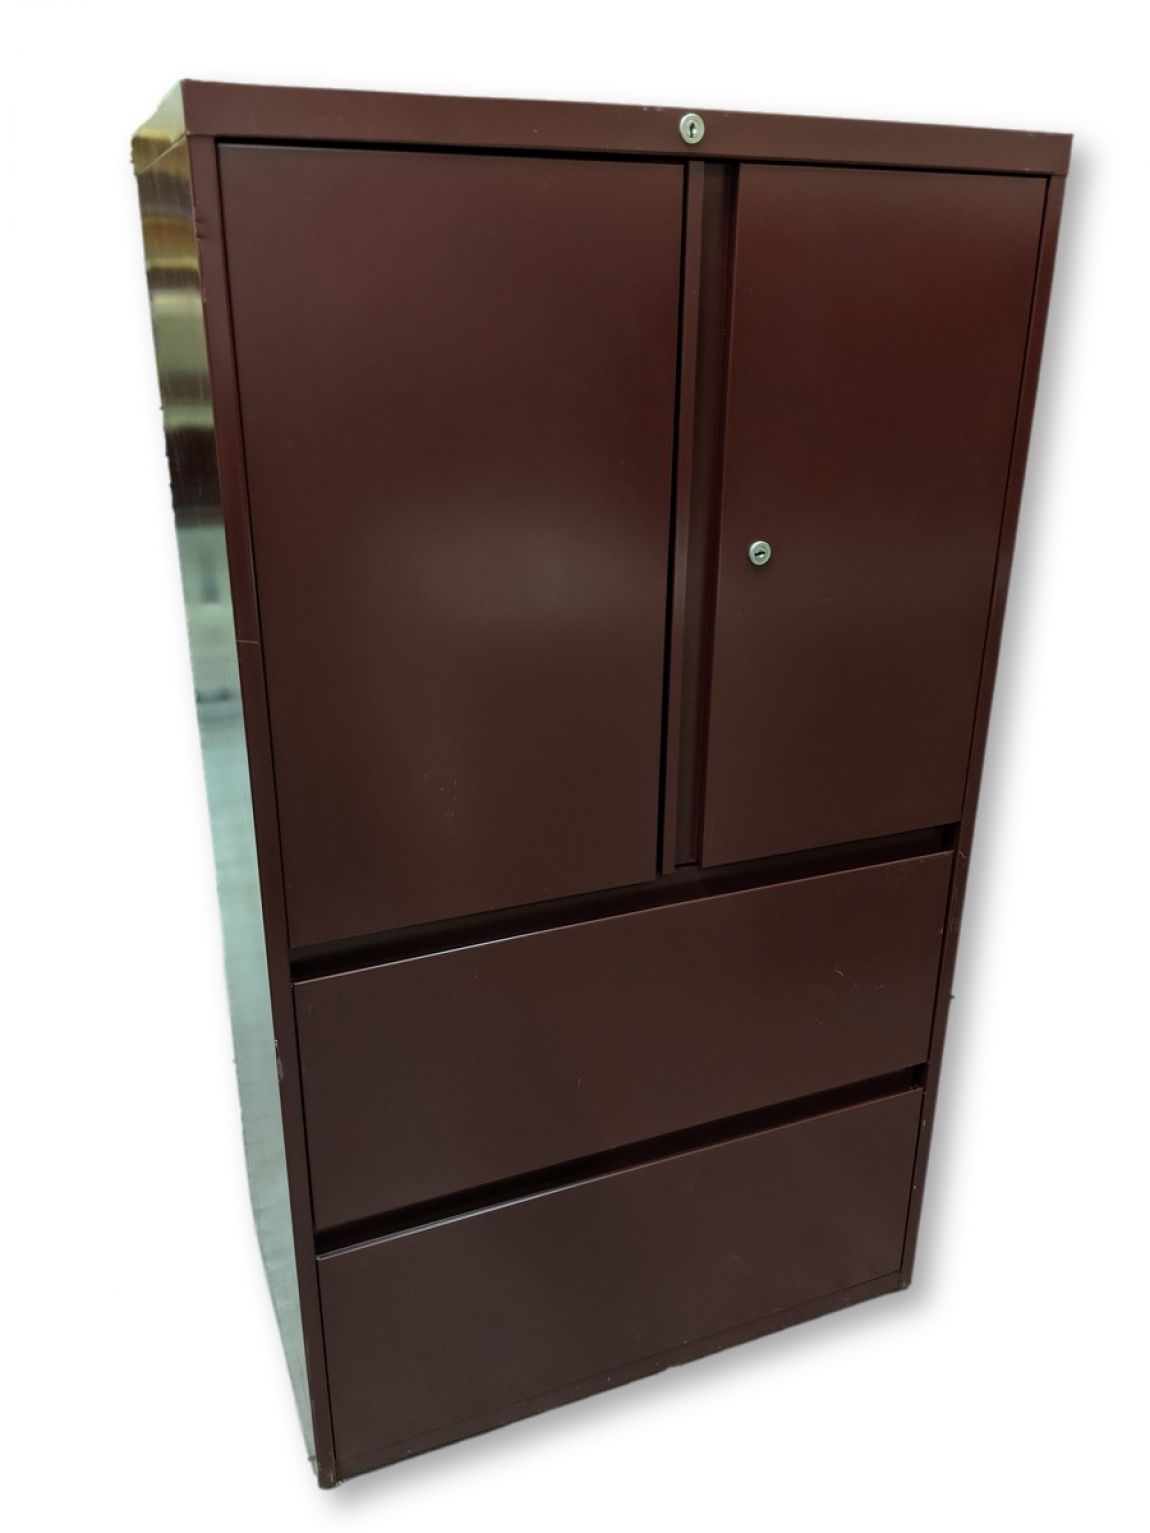 Steelcase Burgundy Storage Cabinet with 2 Lateral Drawers